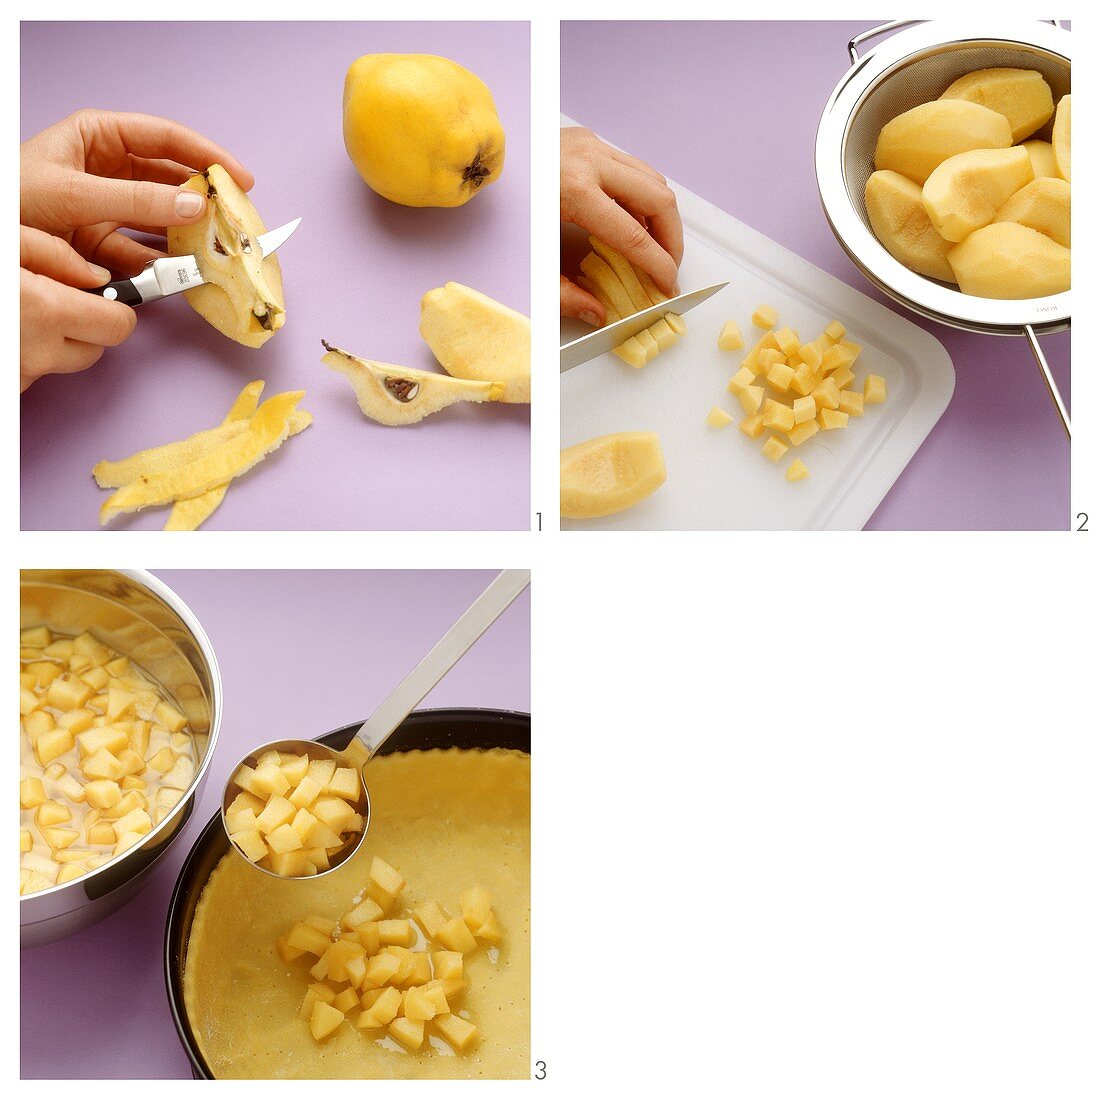 Peeling and dicing quinces and covering a cake base with them